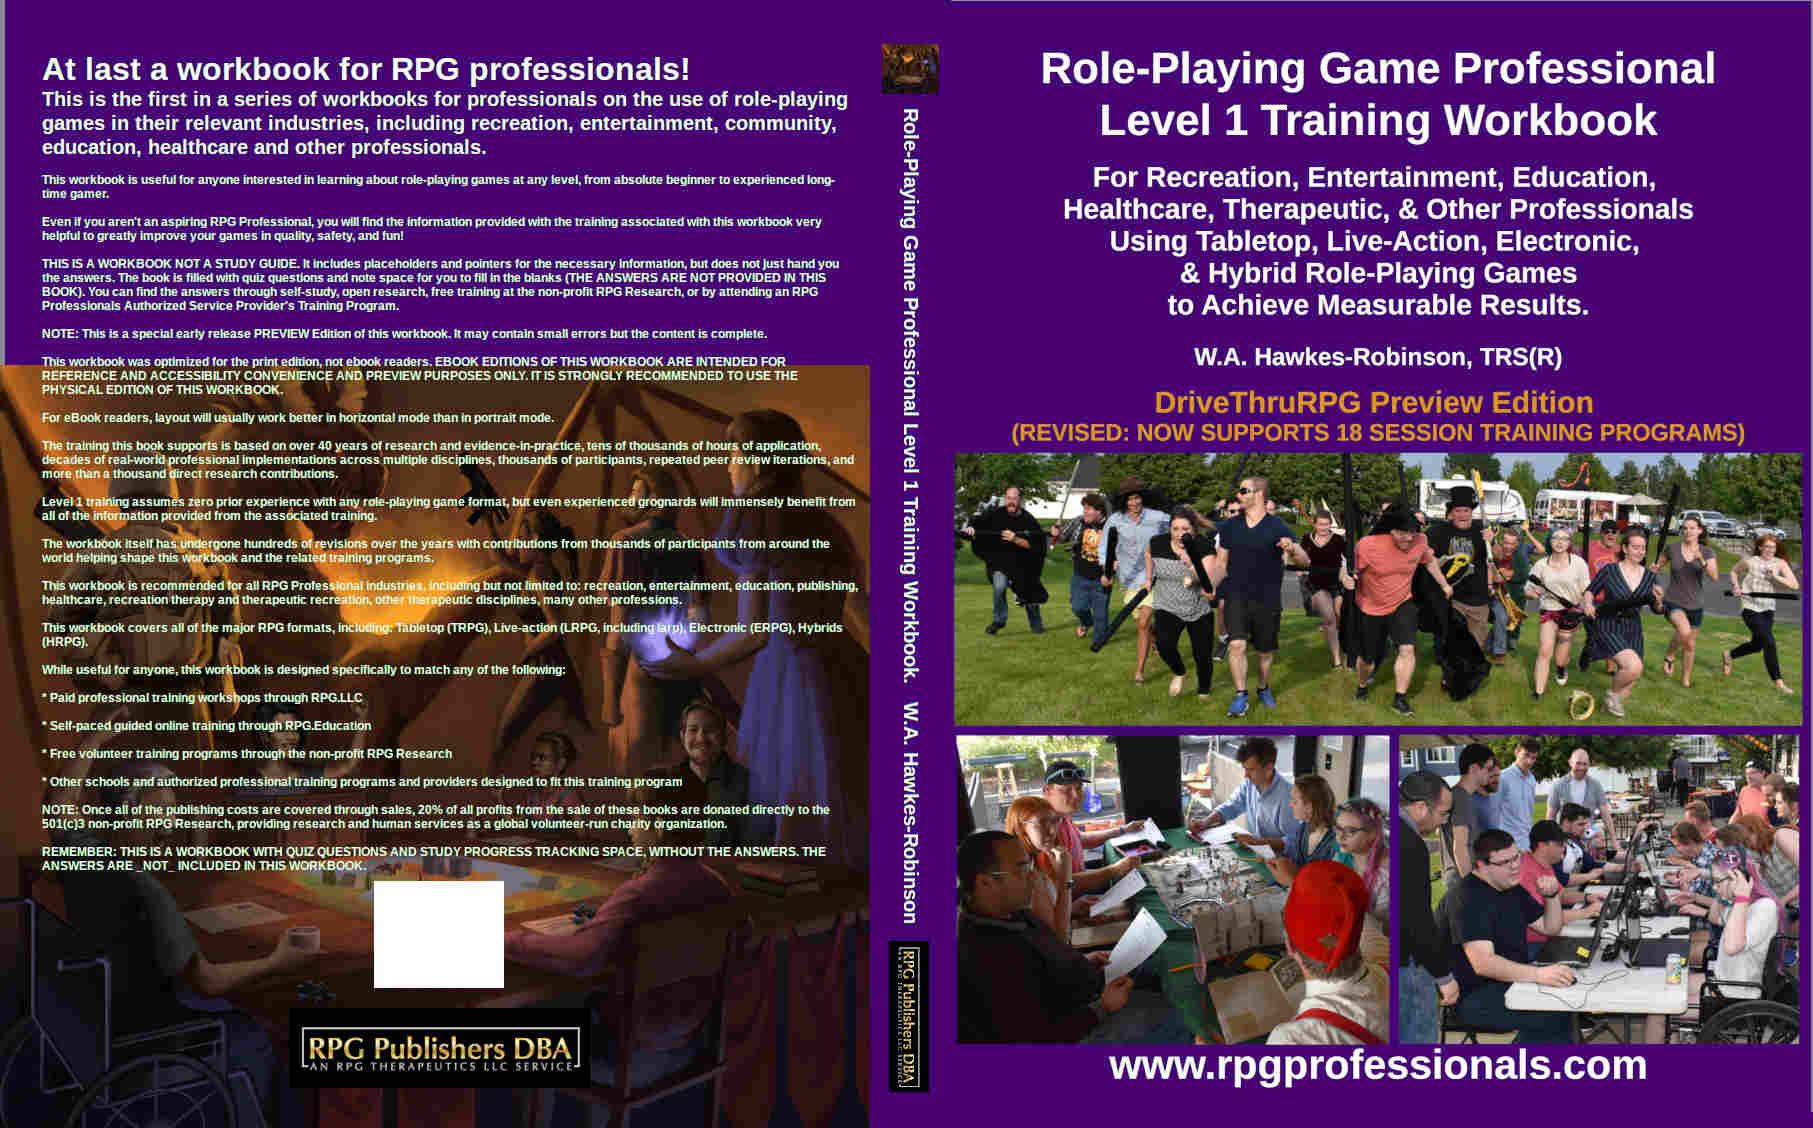 Status Update on the Role-Playing Game Professional Books, Apps, and more - Cover Image